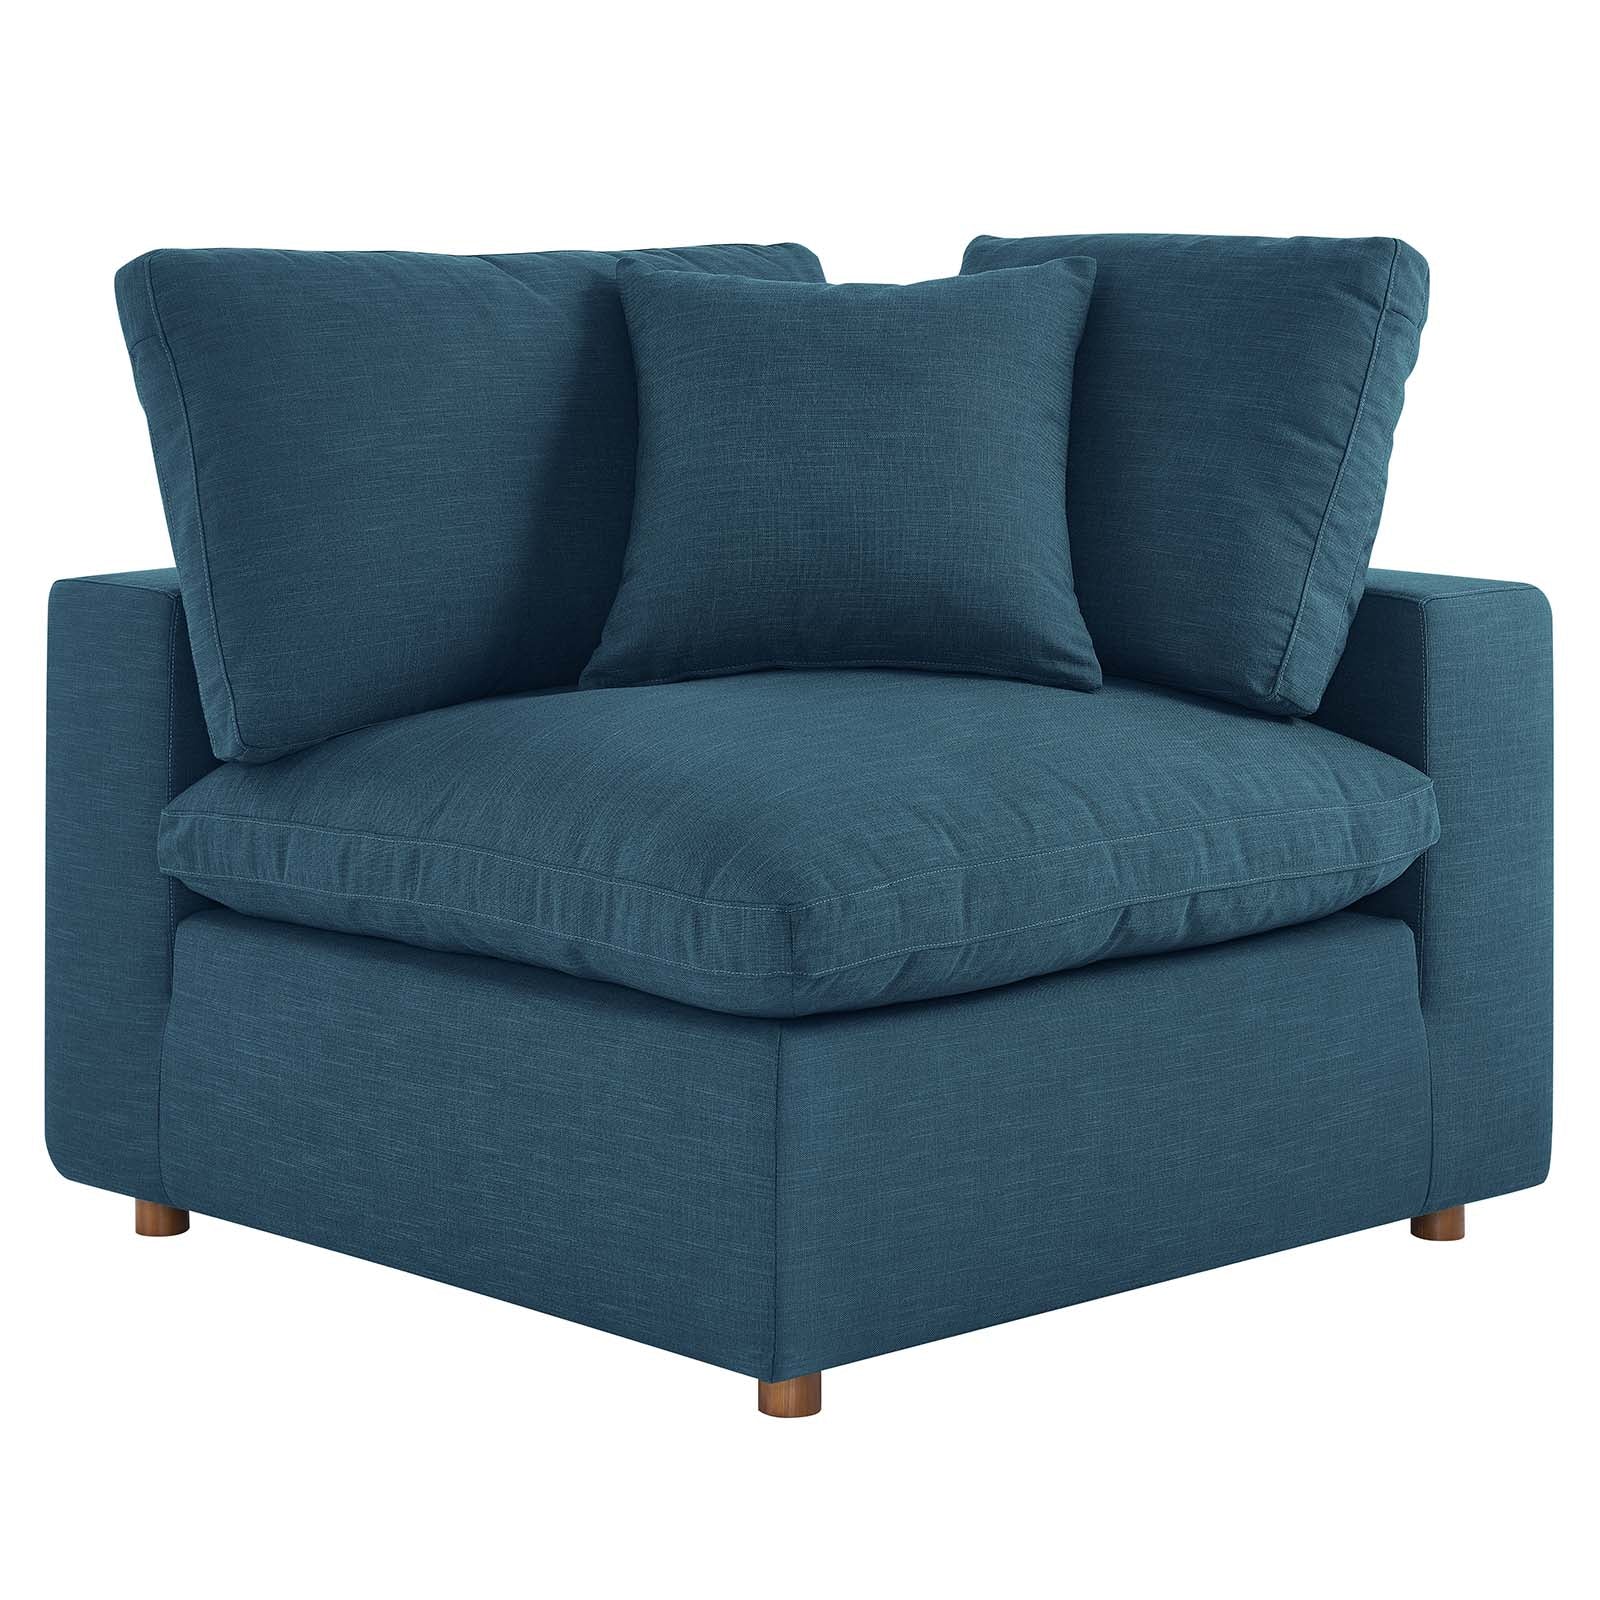 Modway Sectional Sofas - Commix Down Filled Overstuffed 2 Piece Sectional Sofa Set Azure